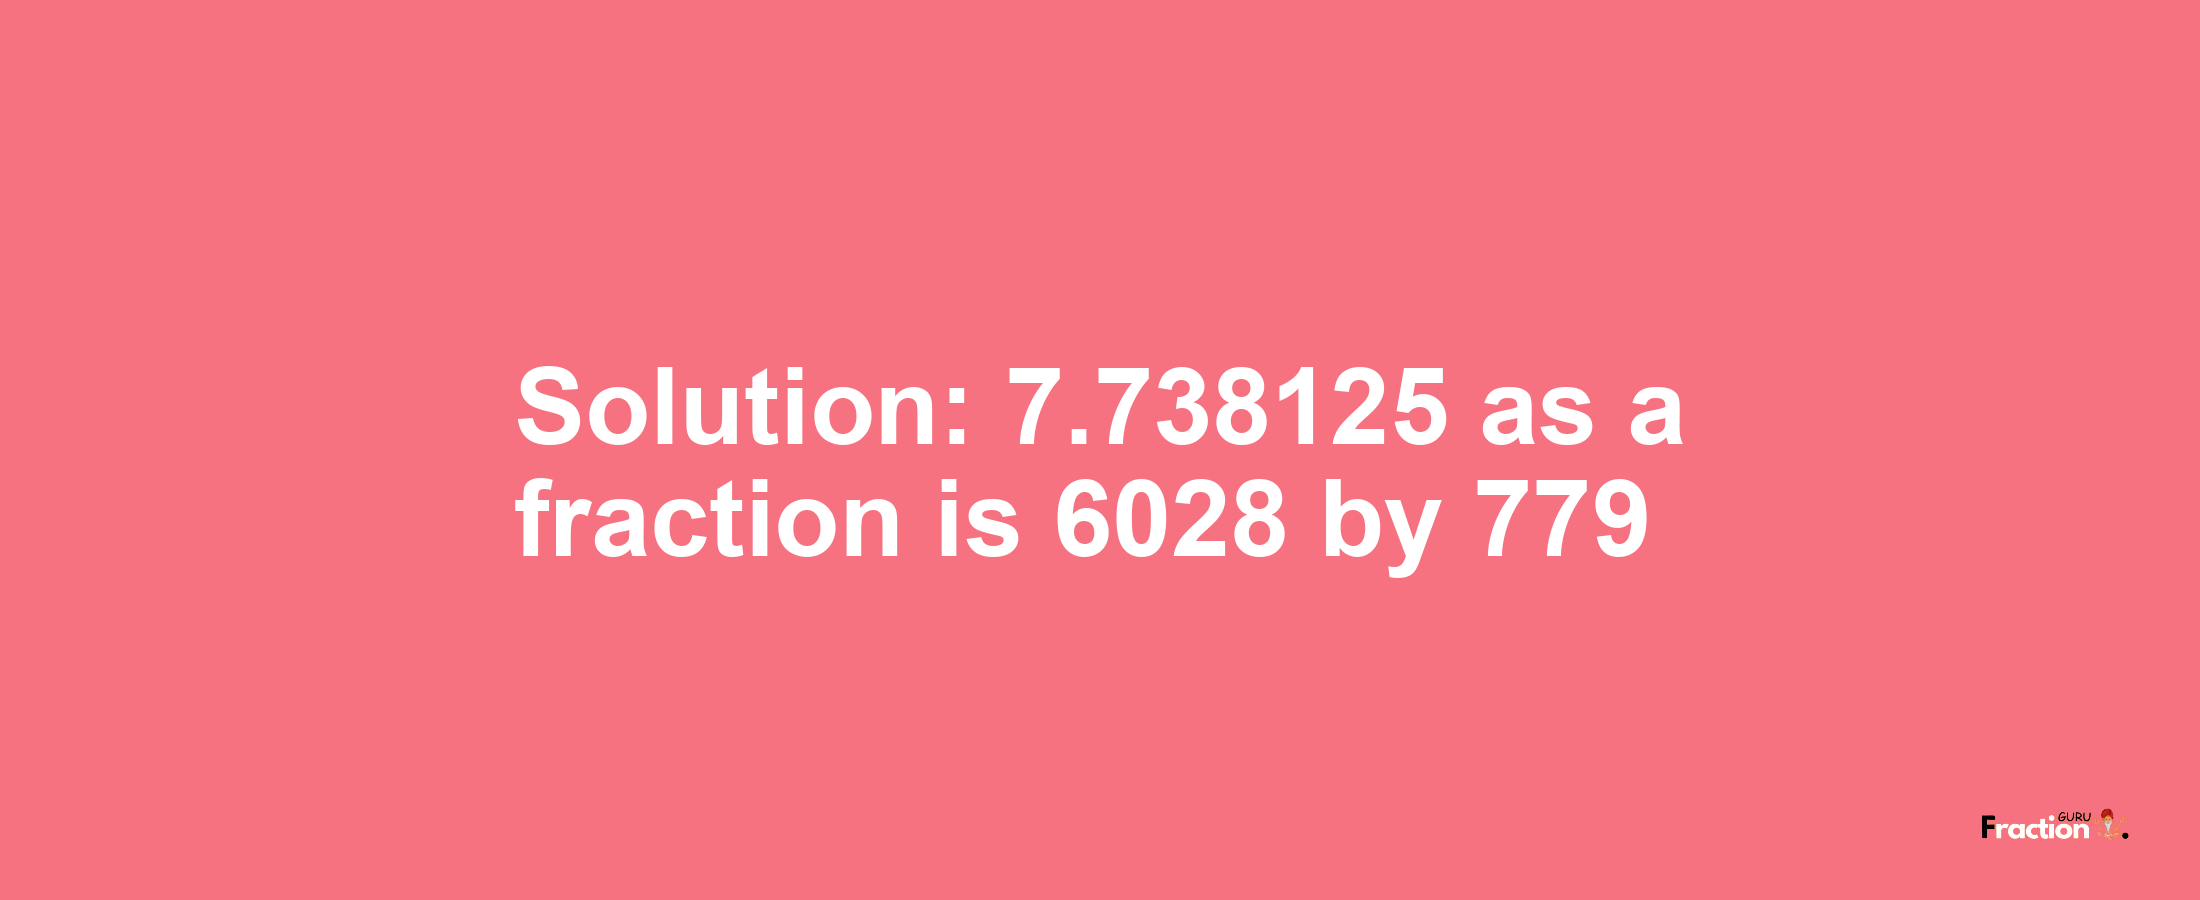 Solution:7.738125 as a fraction is 6028/779